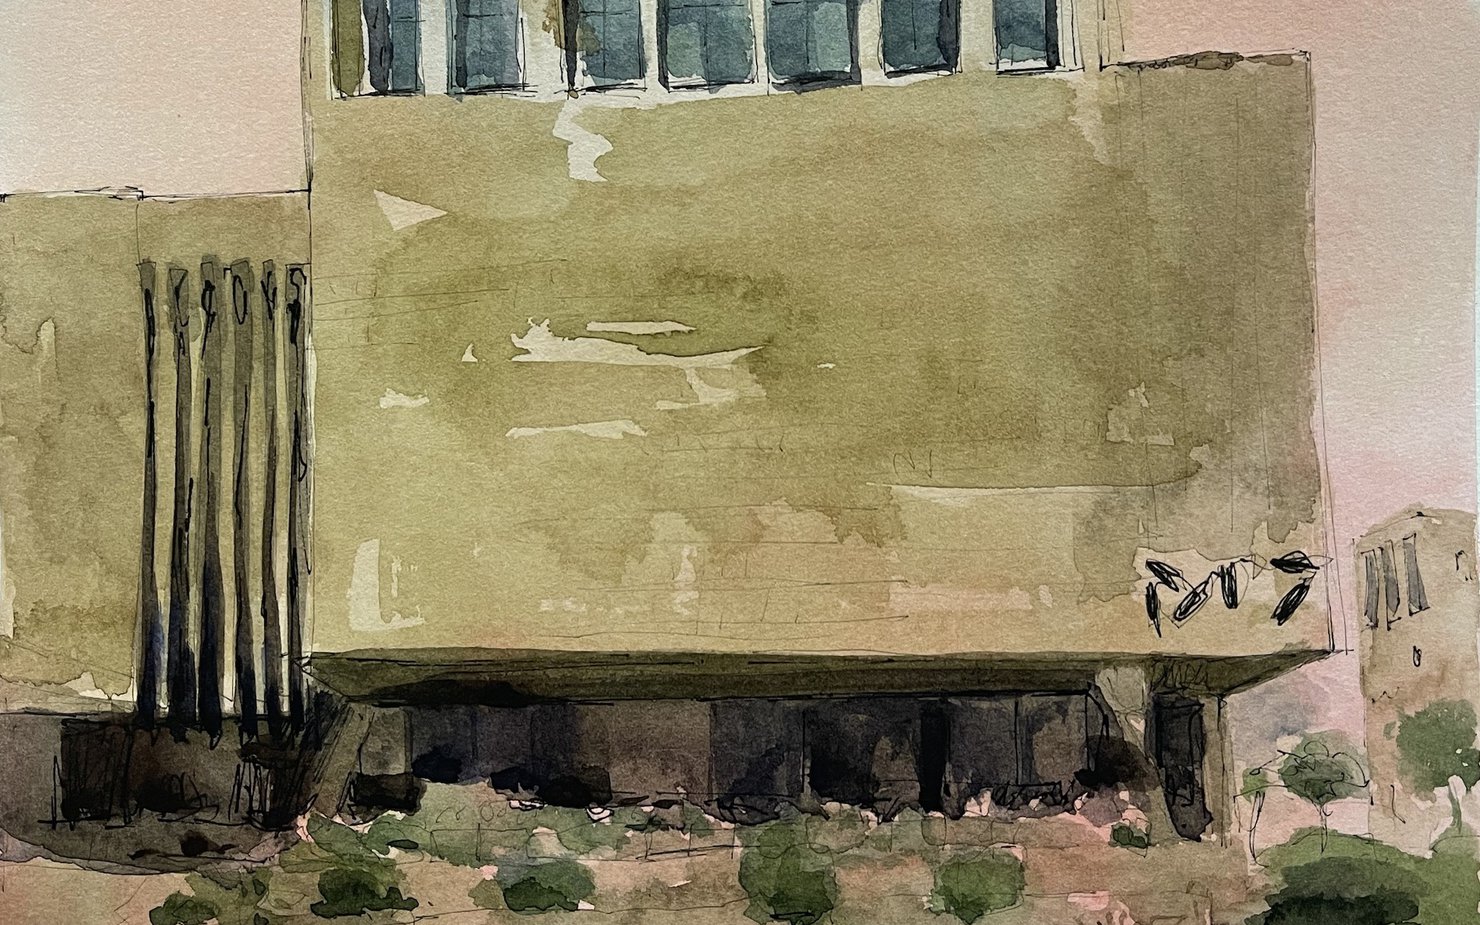 Watercolour painting of M7's exterior